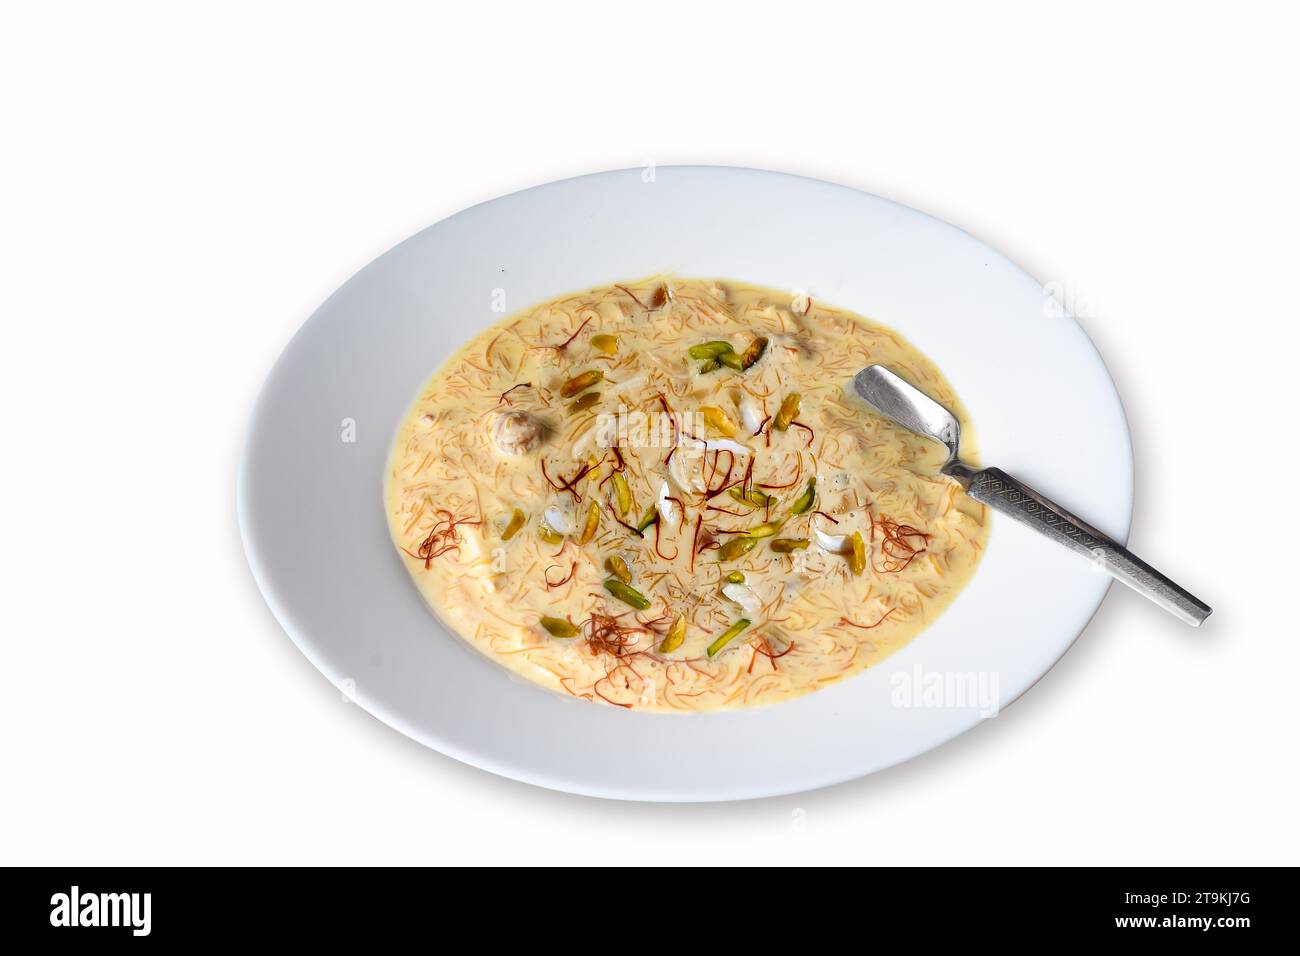 Sheer Khurma is prepared with milk and vermicelli, garnished with saffron, pistachios, and nuts. Stock Photo